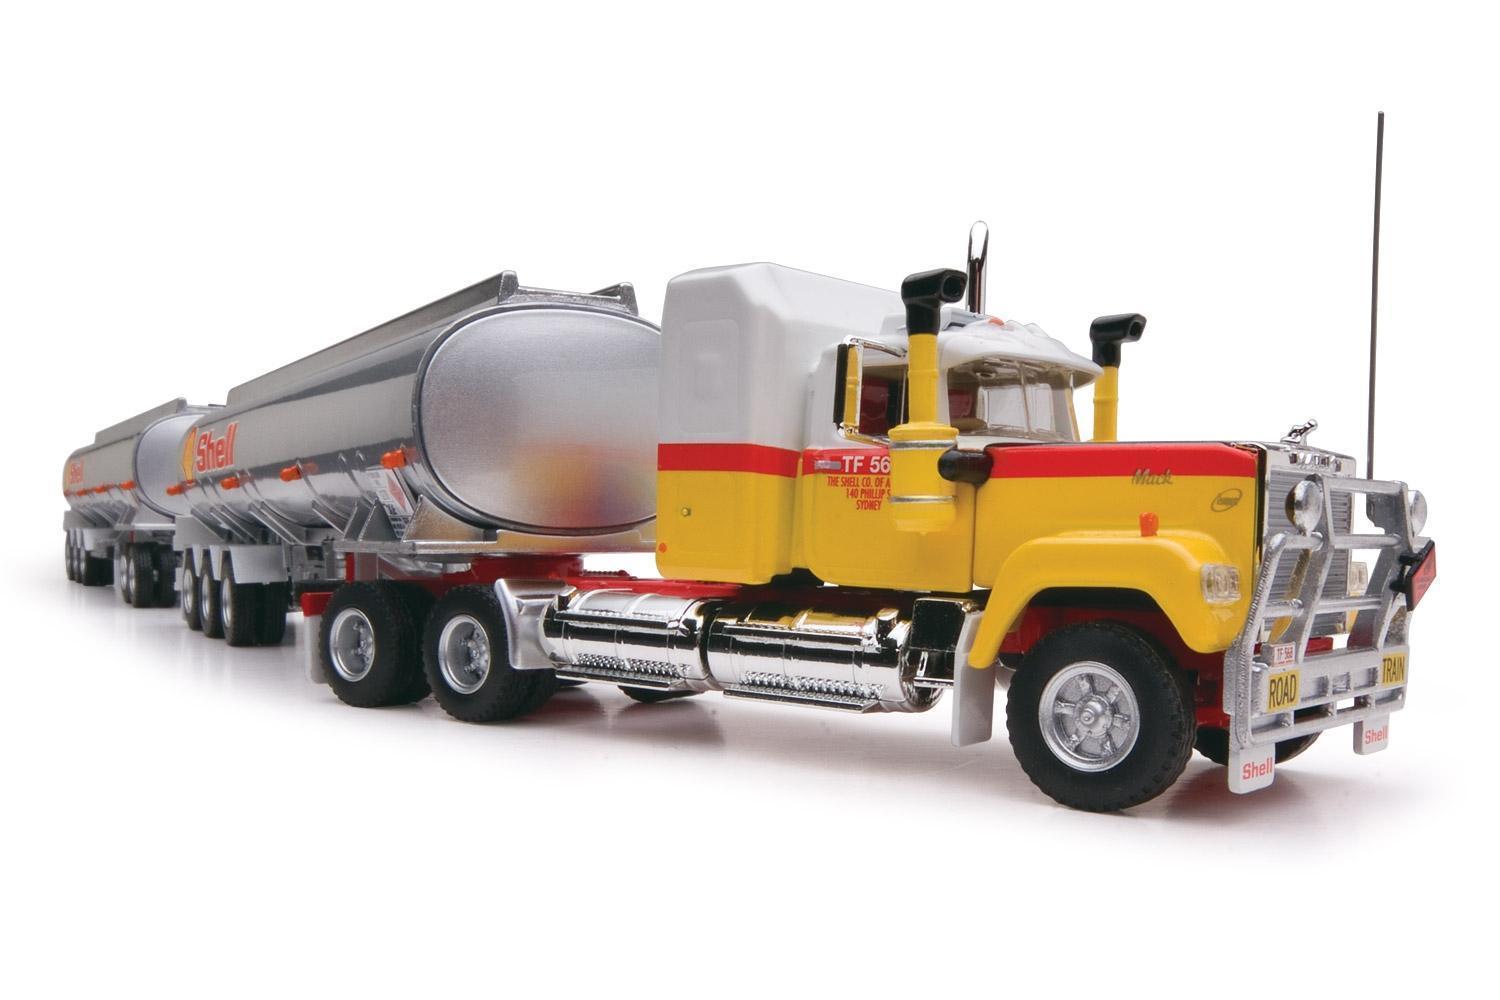 PRE ORDER - SHELL Highway Replicas Tanker Road Train Die Cast Model Truck With Additional Trailer & Dolly 1:64 (FULL PRICE $248.00)